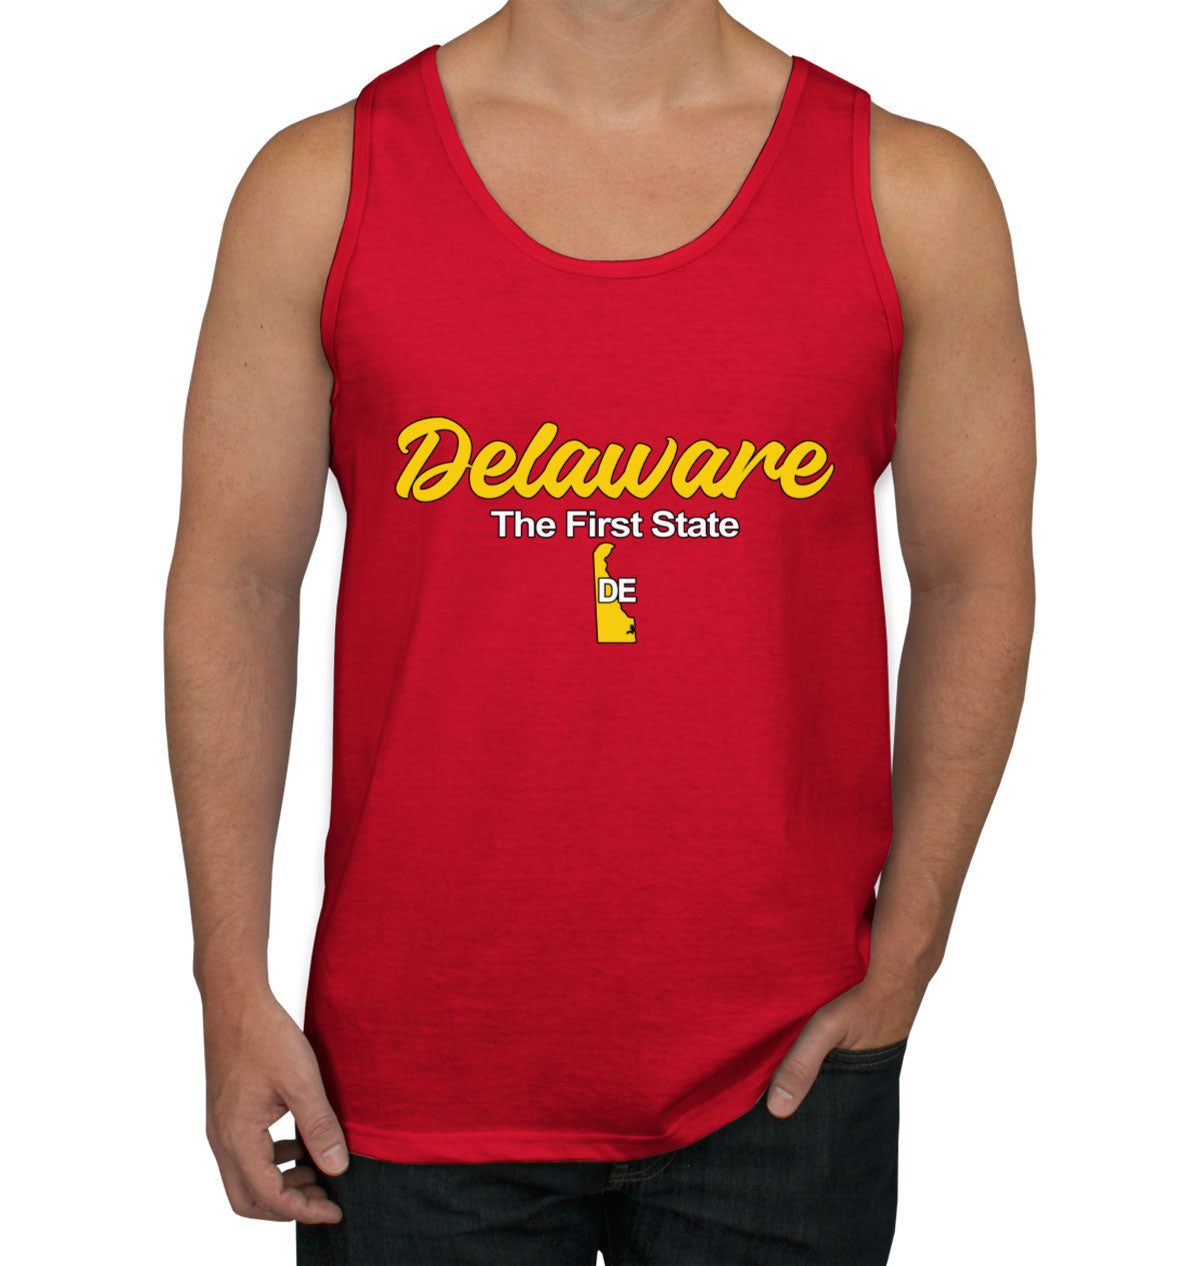 Delaware The First State Men's Tank Top